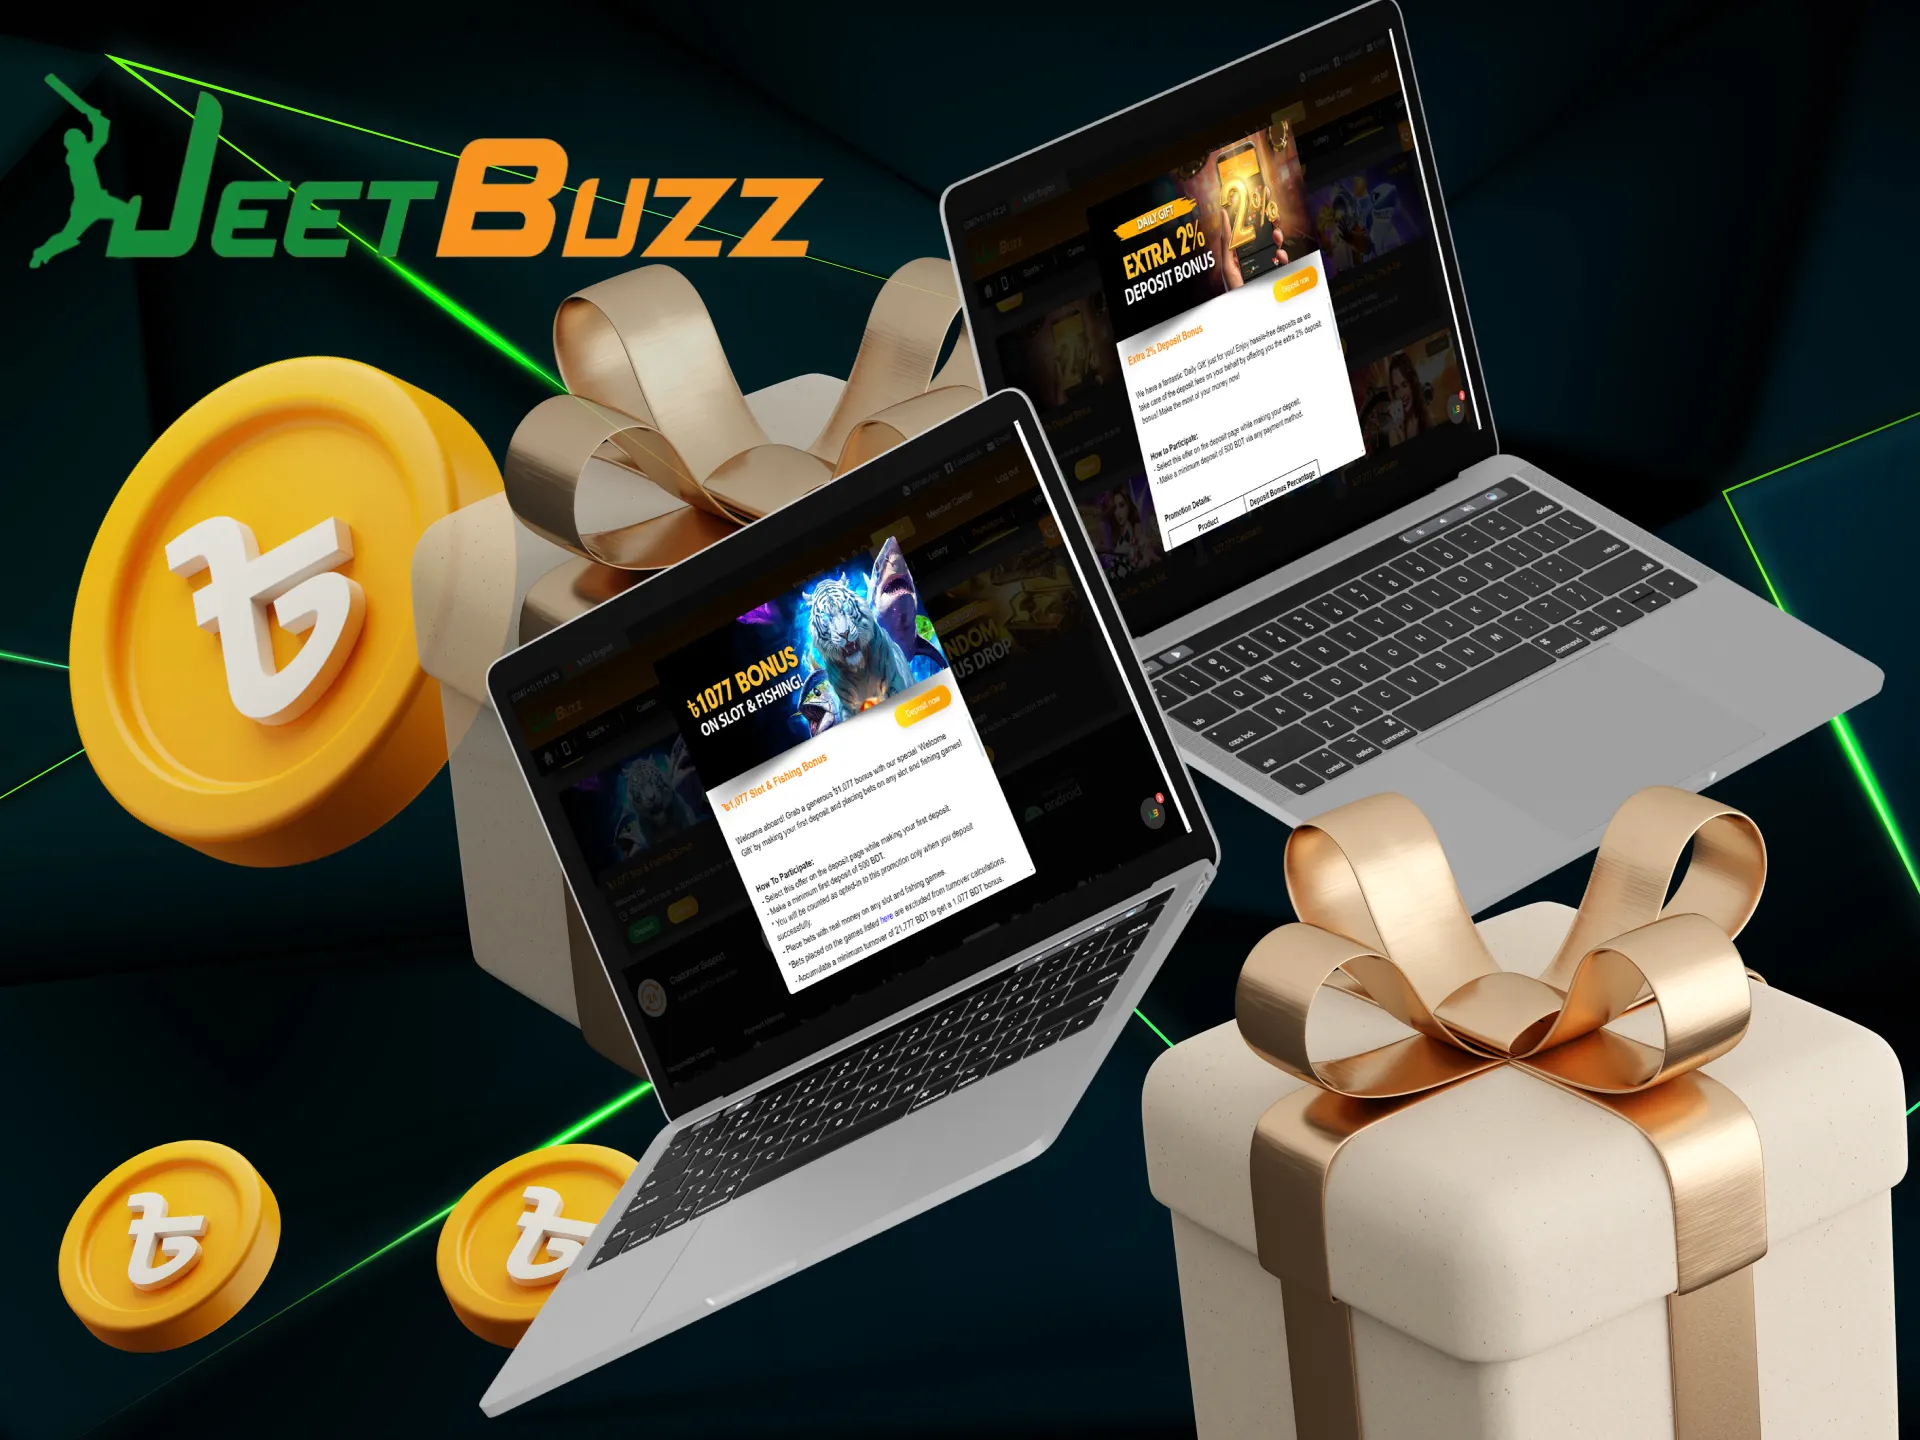 JeetBuzz gives every player a first deposit bonus.